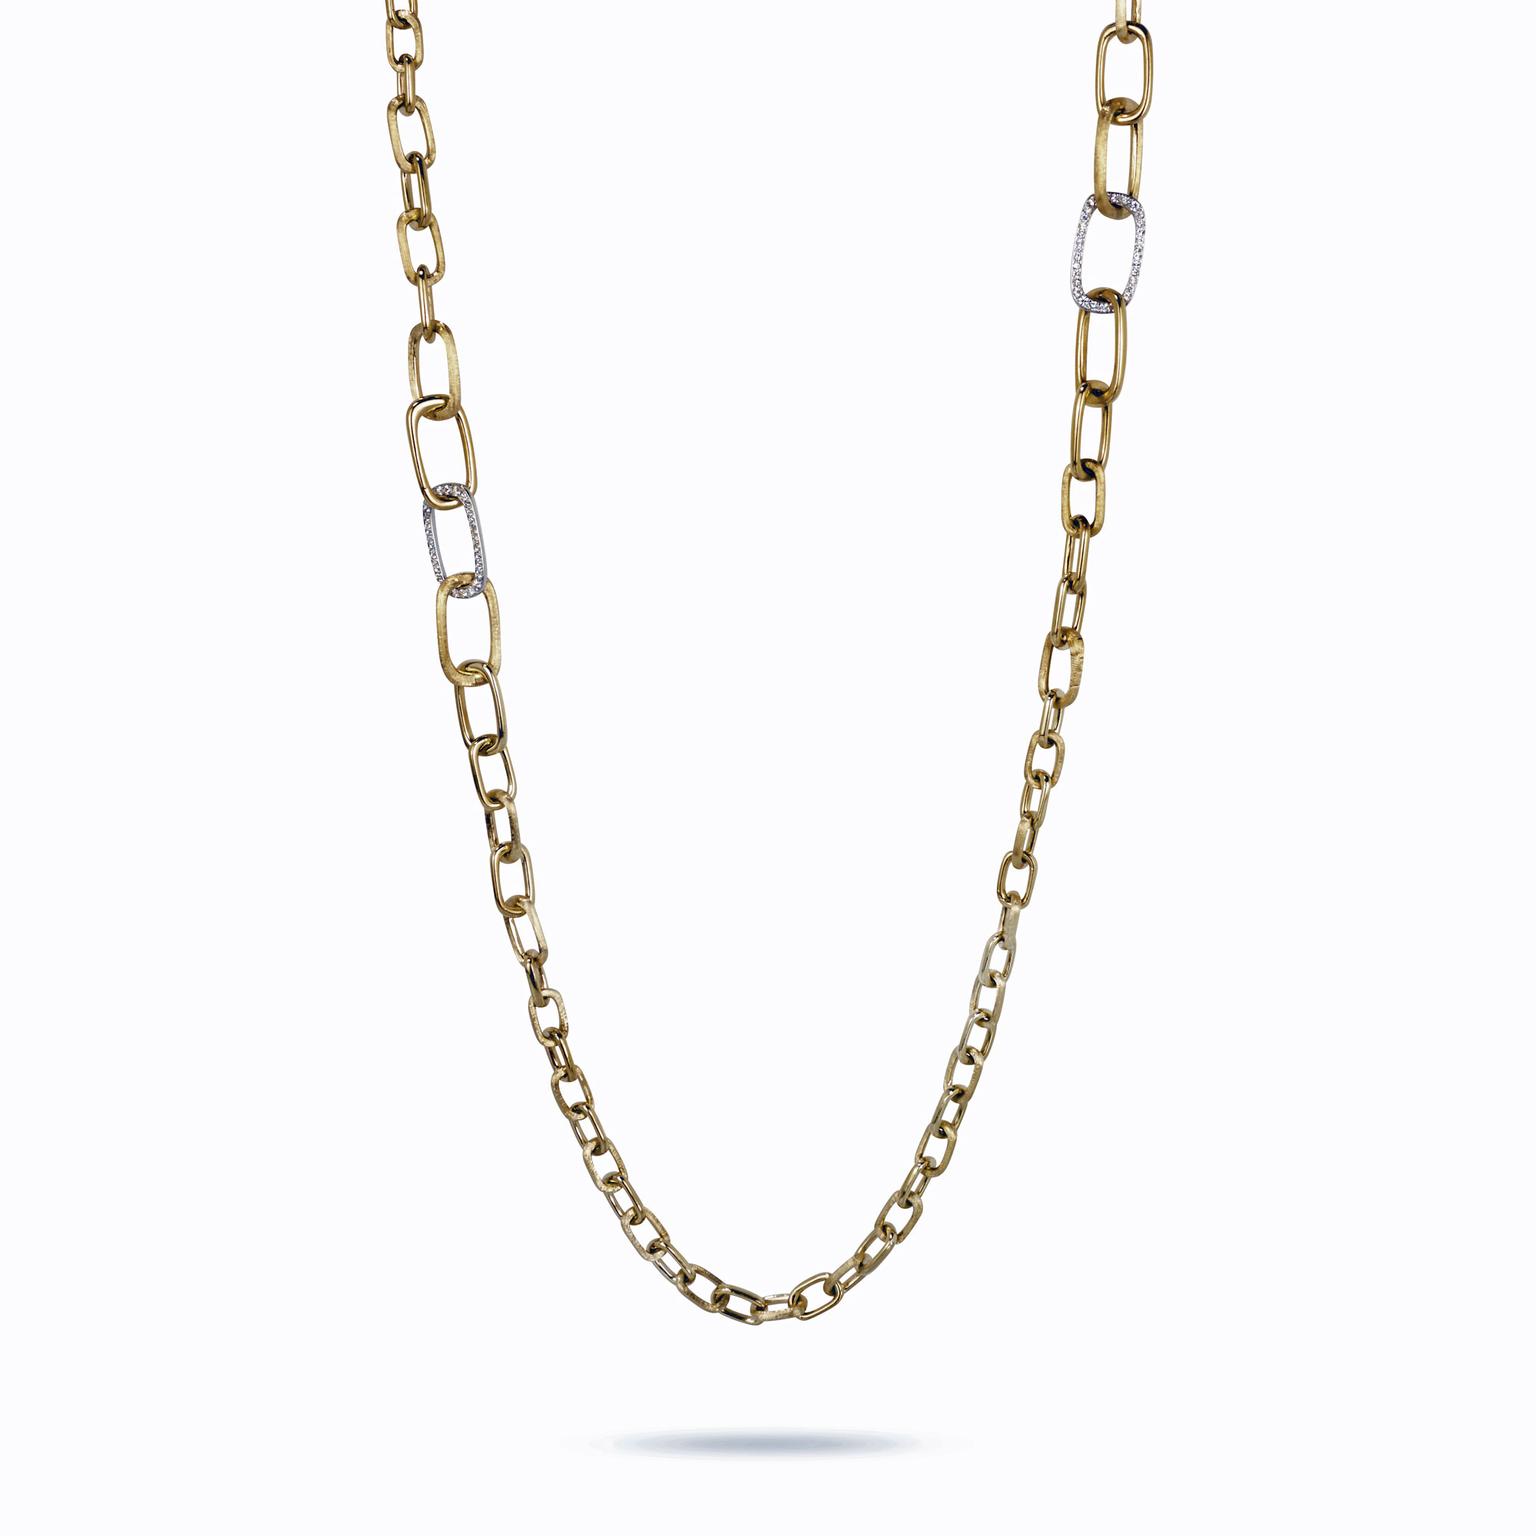 Marco Bicego gold necklace